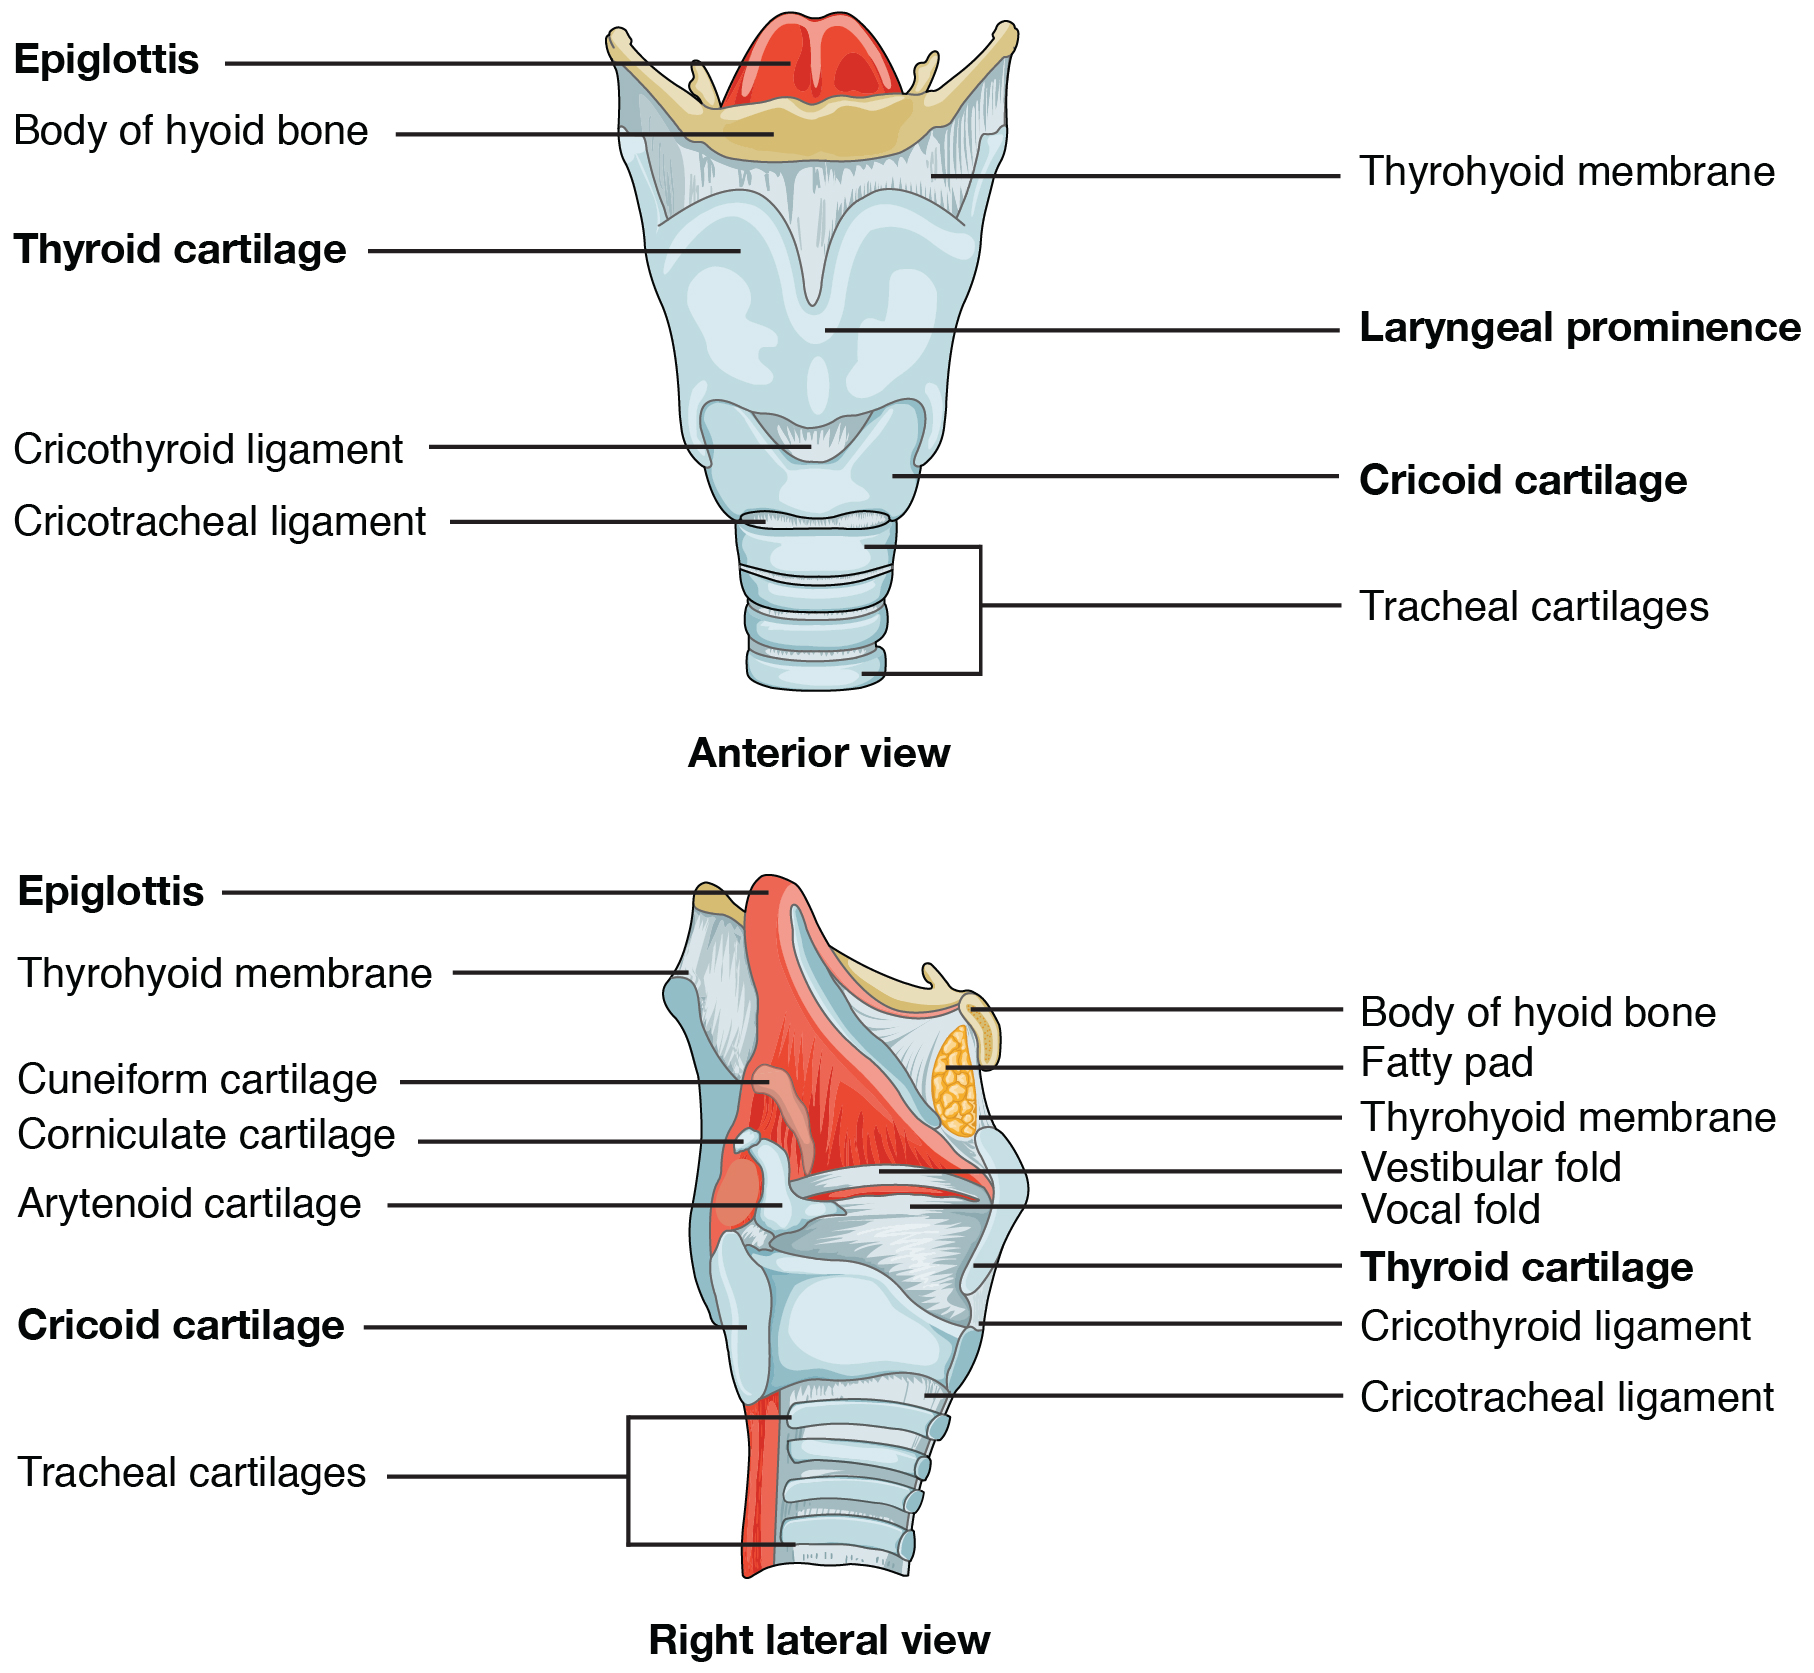 Labeled diagram of the structures of the larynx.